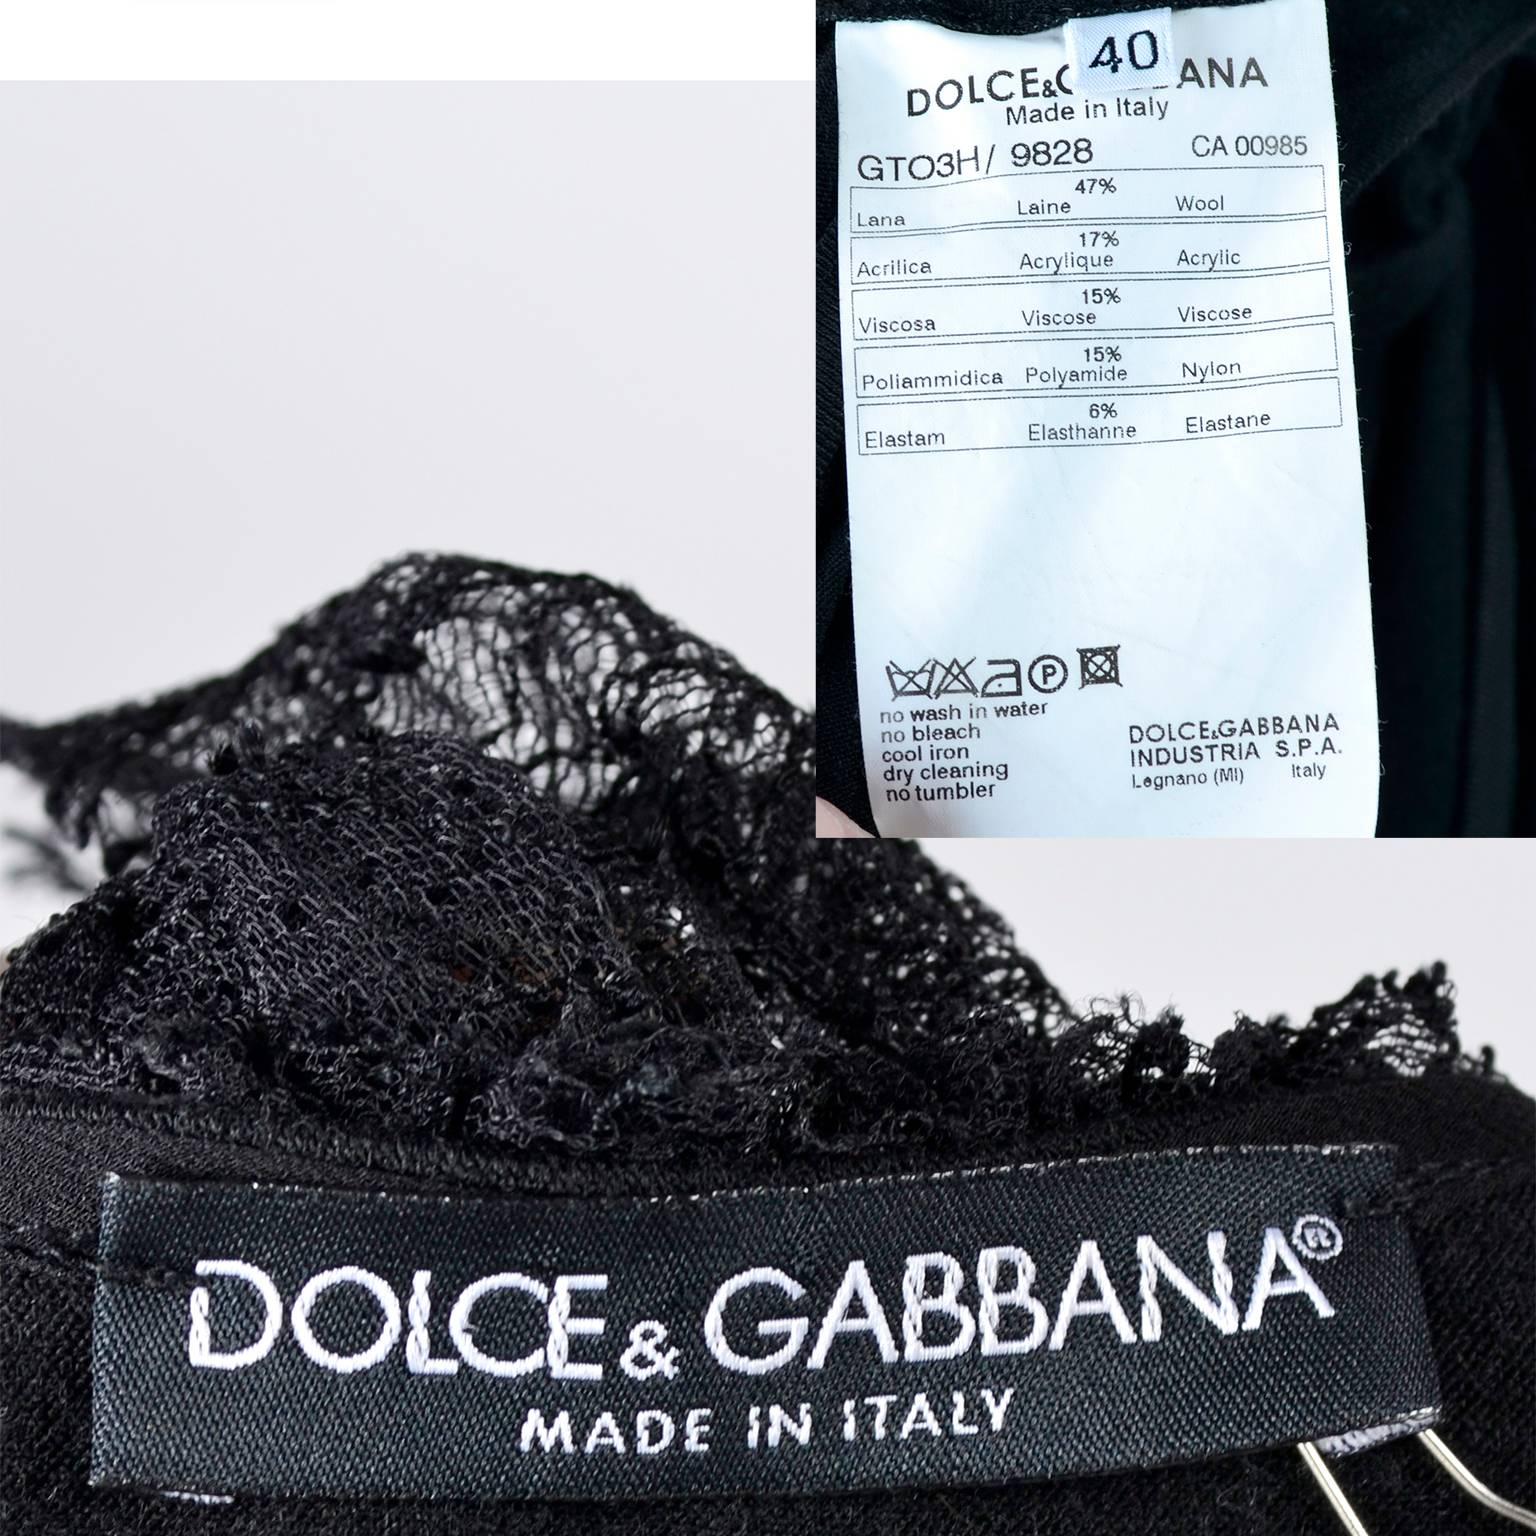 Dolce & Gabbana Black Lace 2 pc Dress With Corset Style Top and Lace Skirt For Sale 2